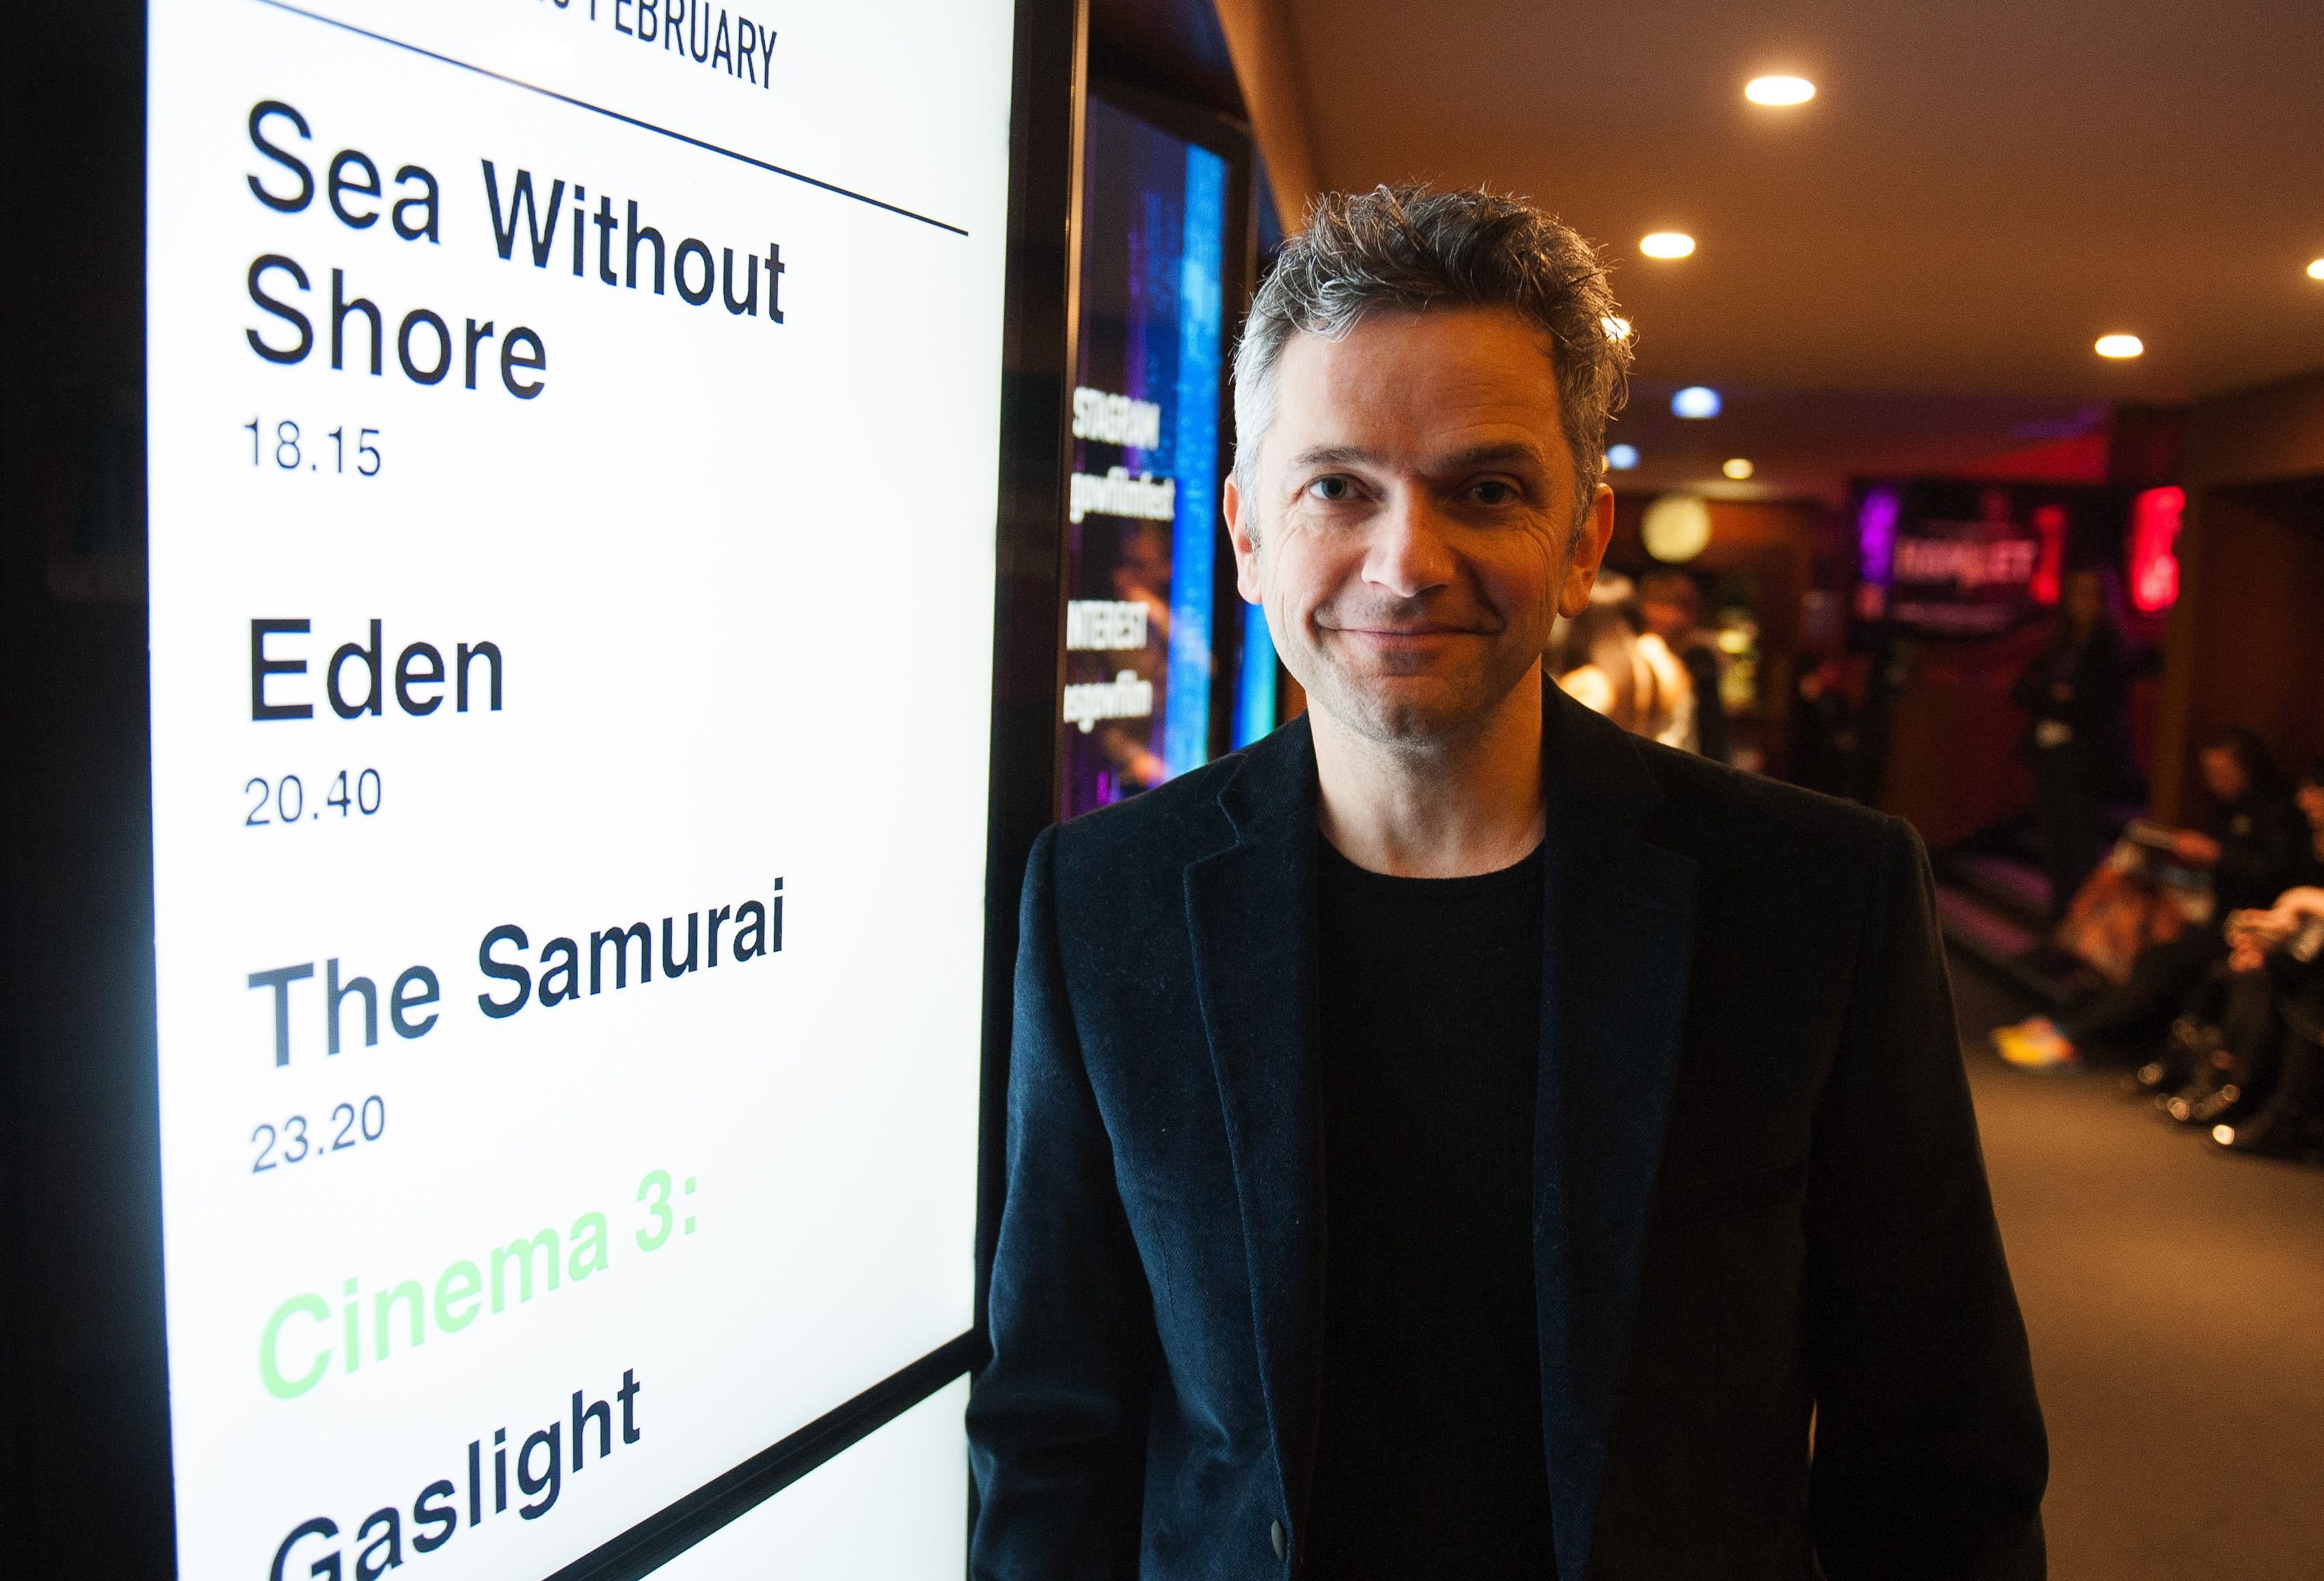 Andre Semenza (director) at World Premiere of Sea without Shore at Glasgow Film Festival 2015